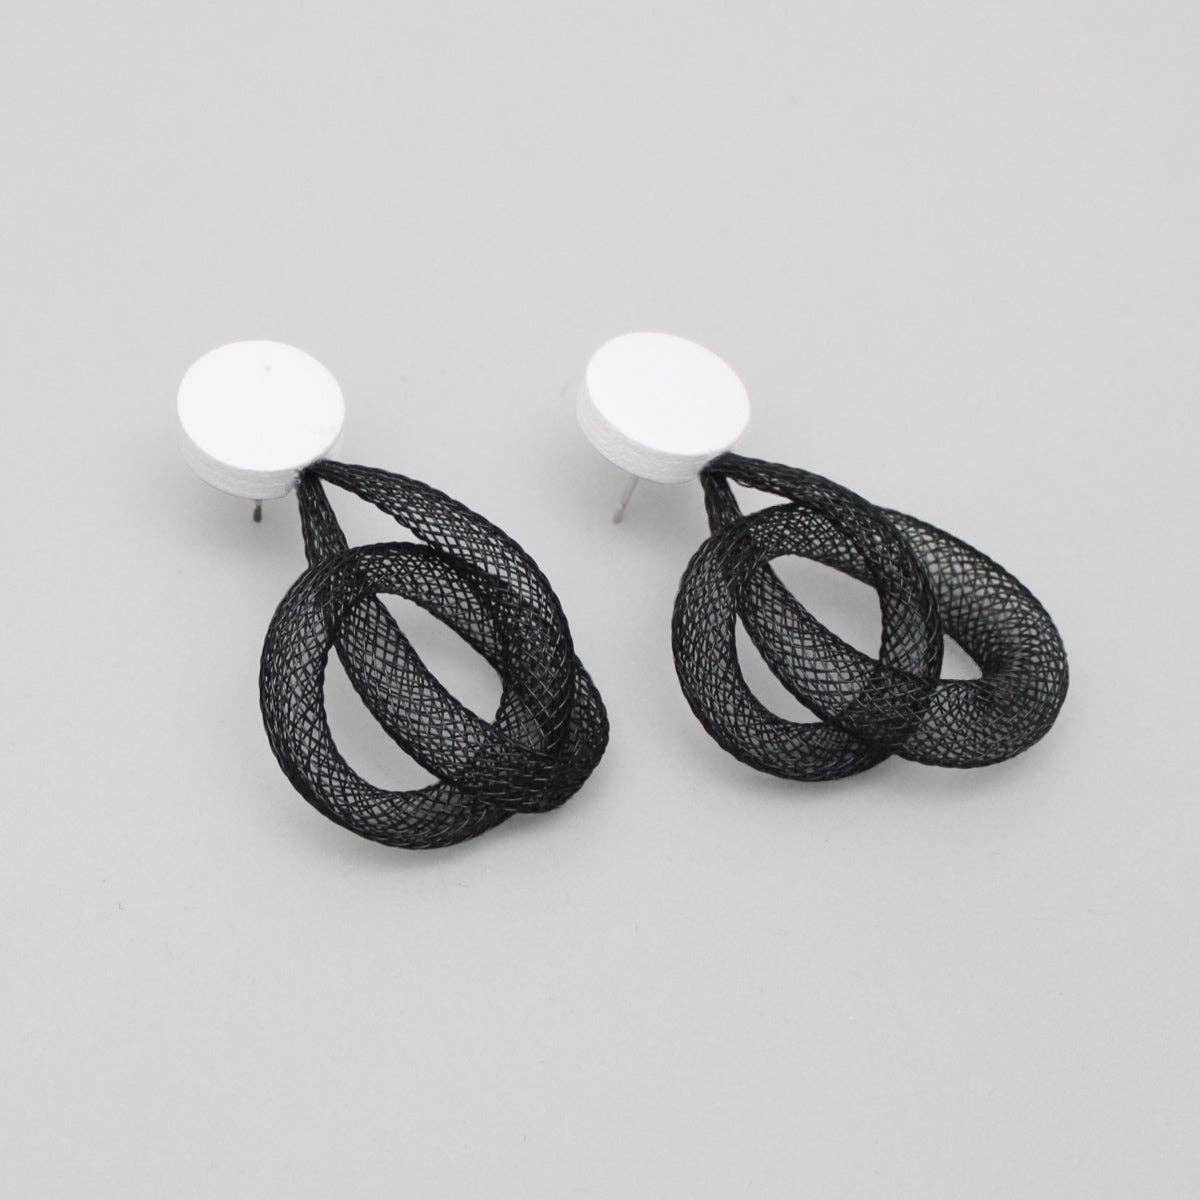 Sylca Designs - Black Mesh Abstract Earrings